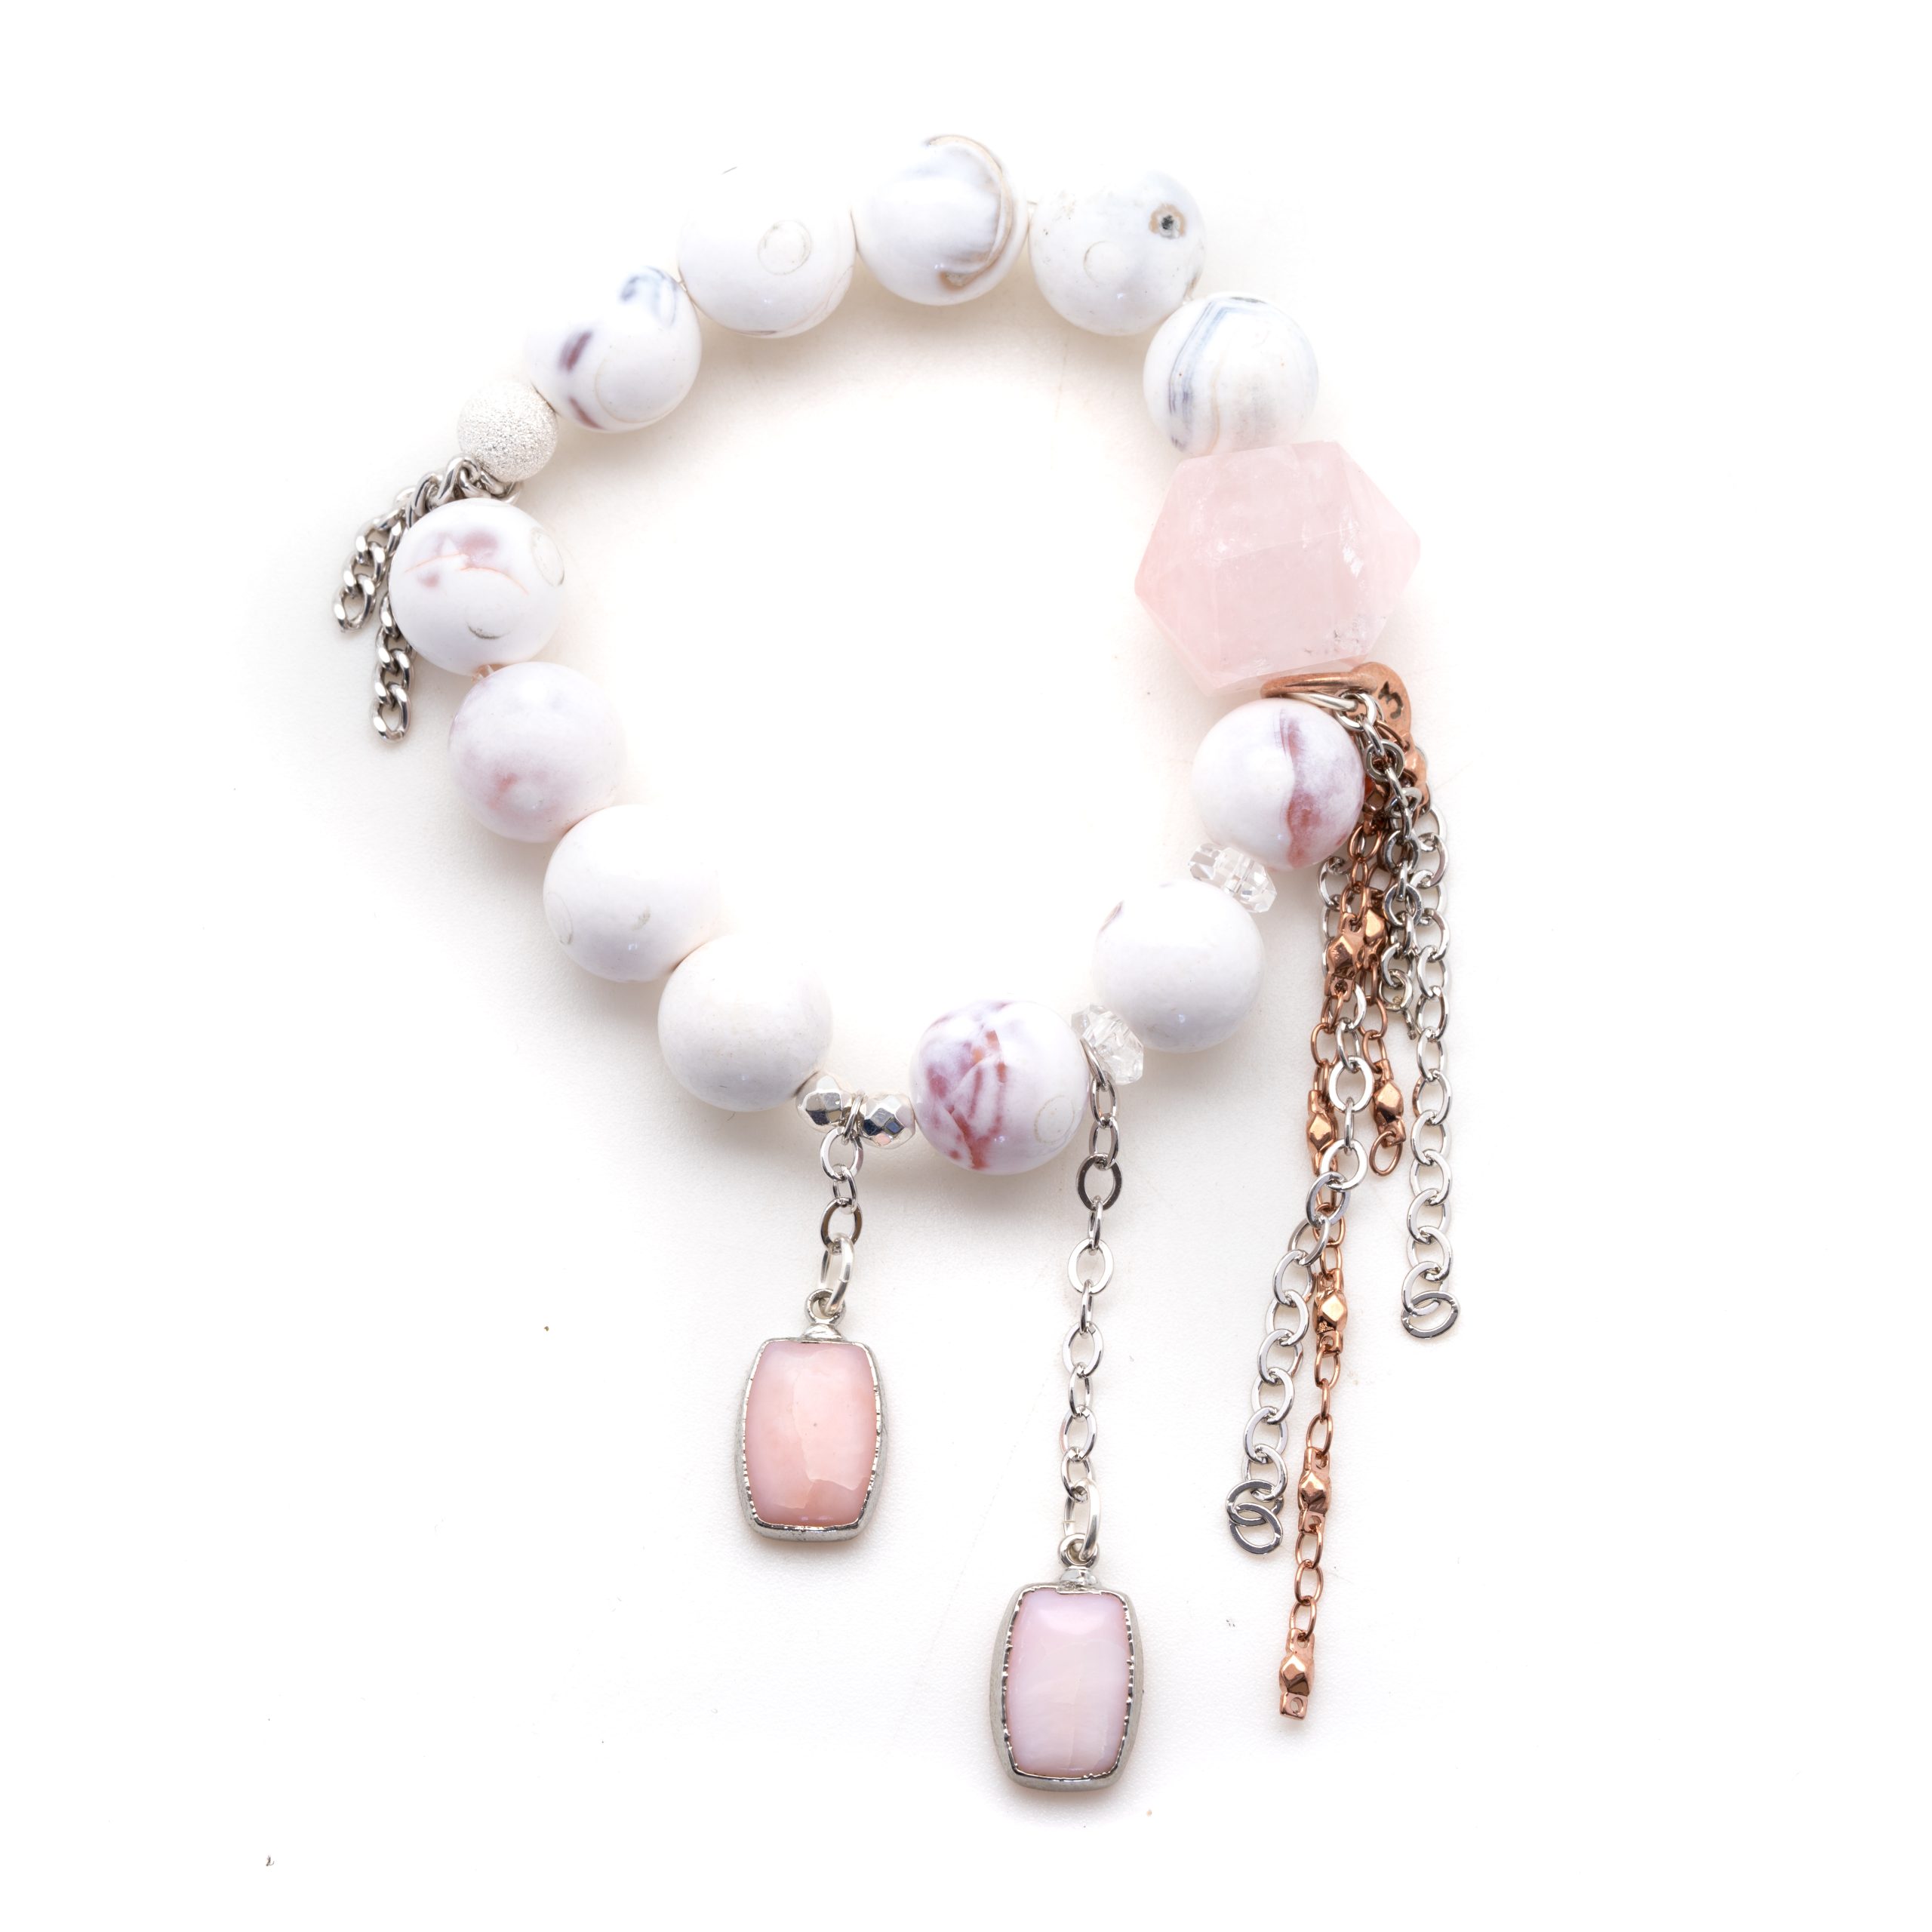 Porcelain Jasper with a Pink Calcite Waterfall